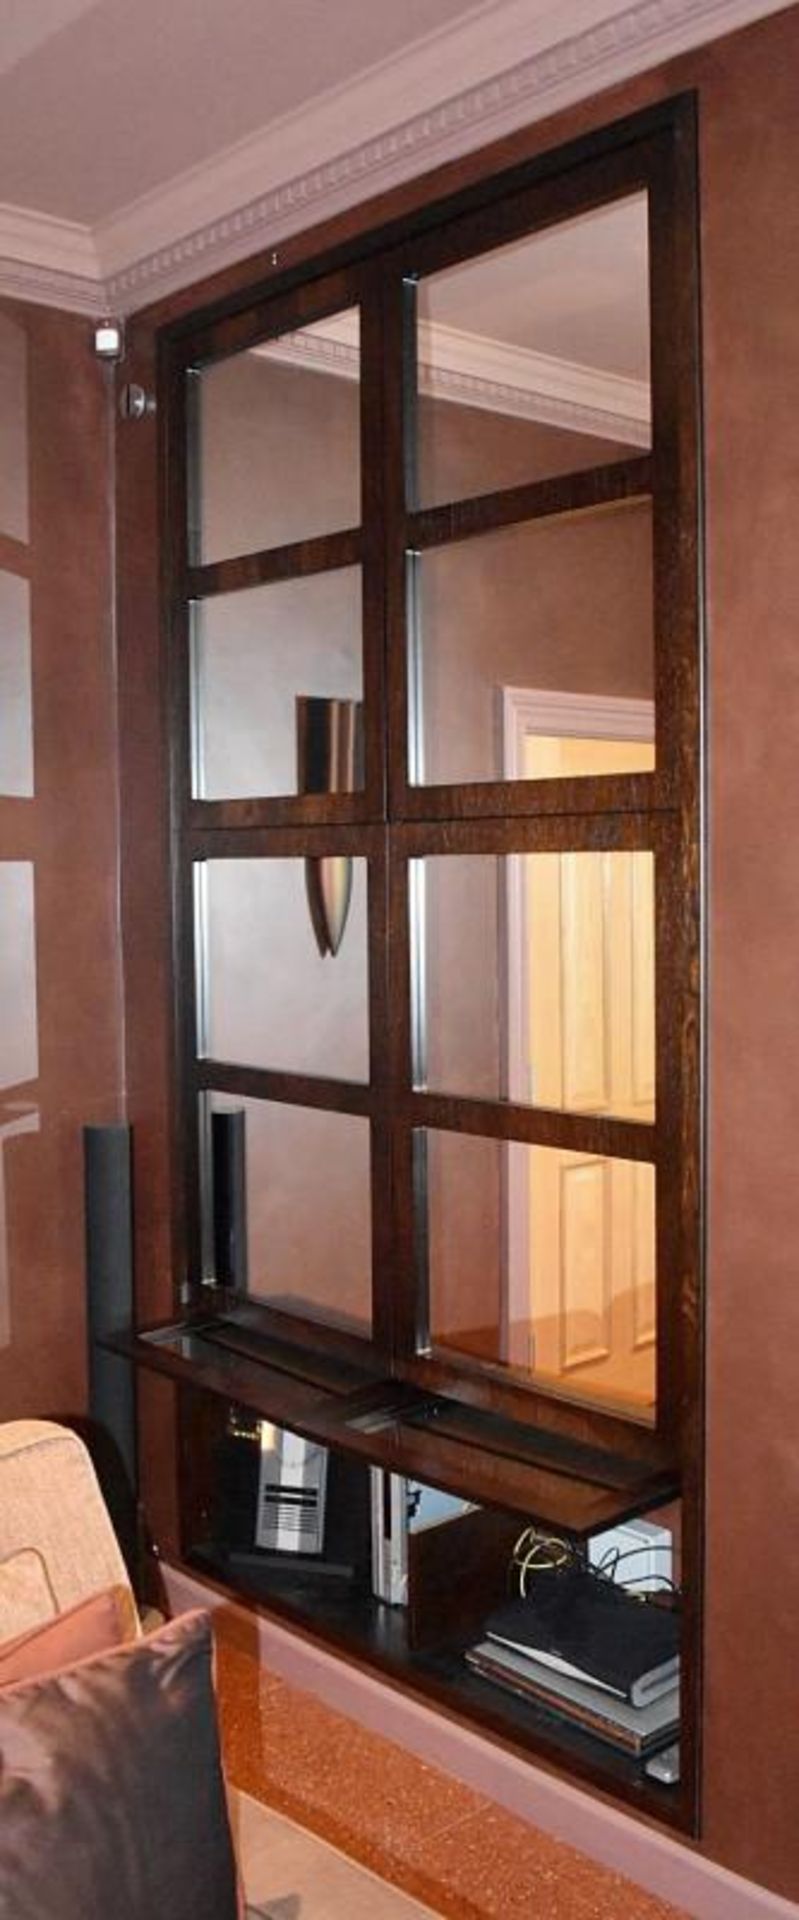 A Pair Of Built-In Bookcases With Mirrored Doors - Dimensions: W144 x H255 x 48cm *NO VAT ON HAMMER* - Image 3 of 5